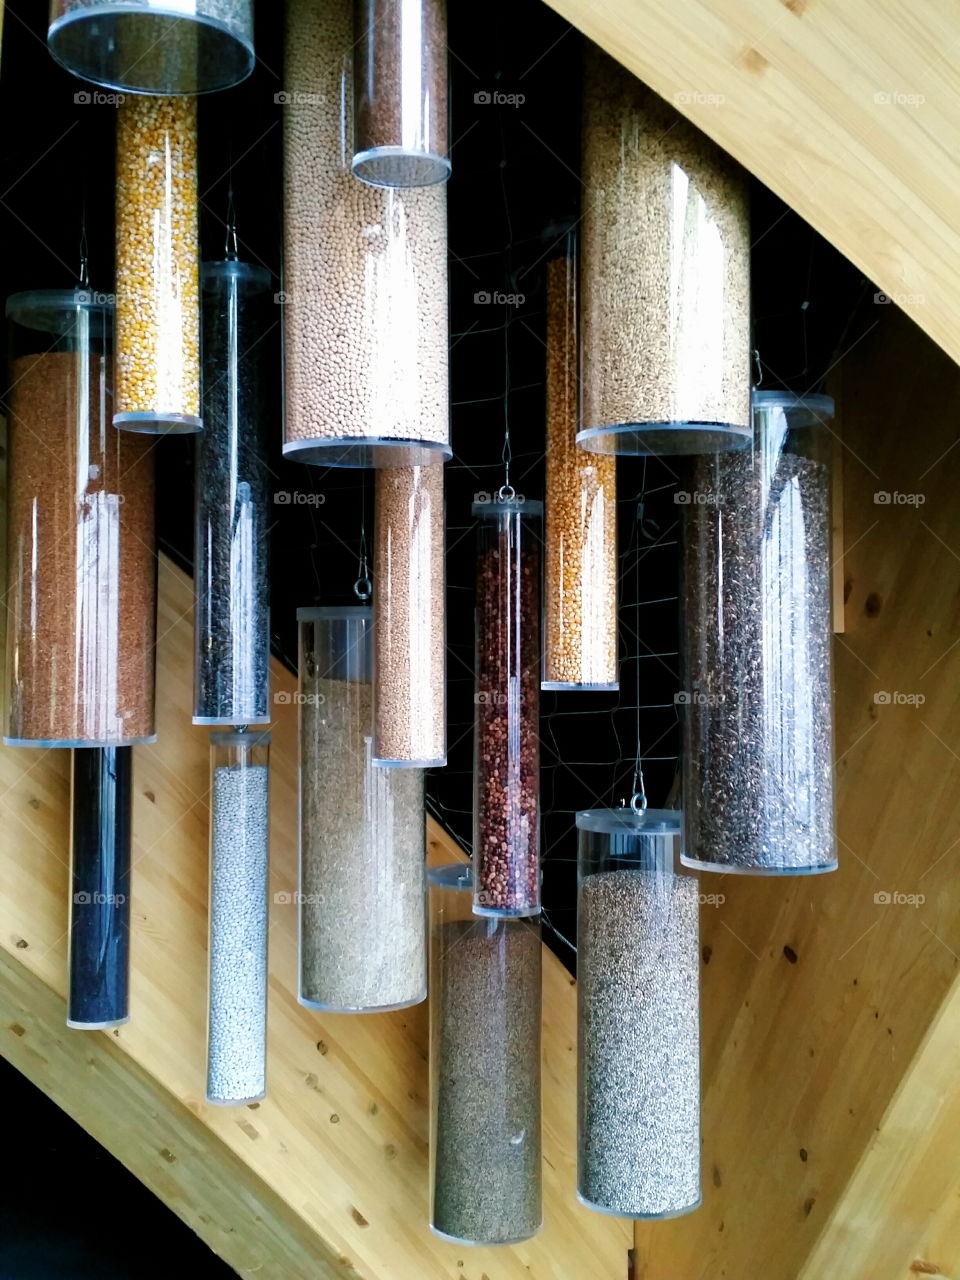 Seeds in tubes @ Expo 2015